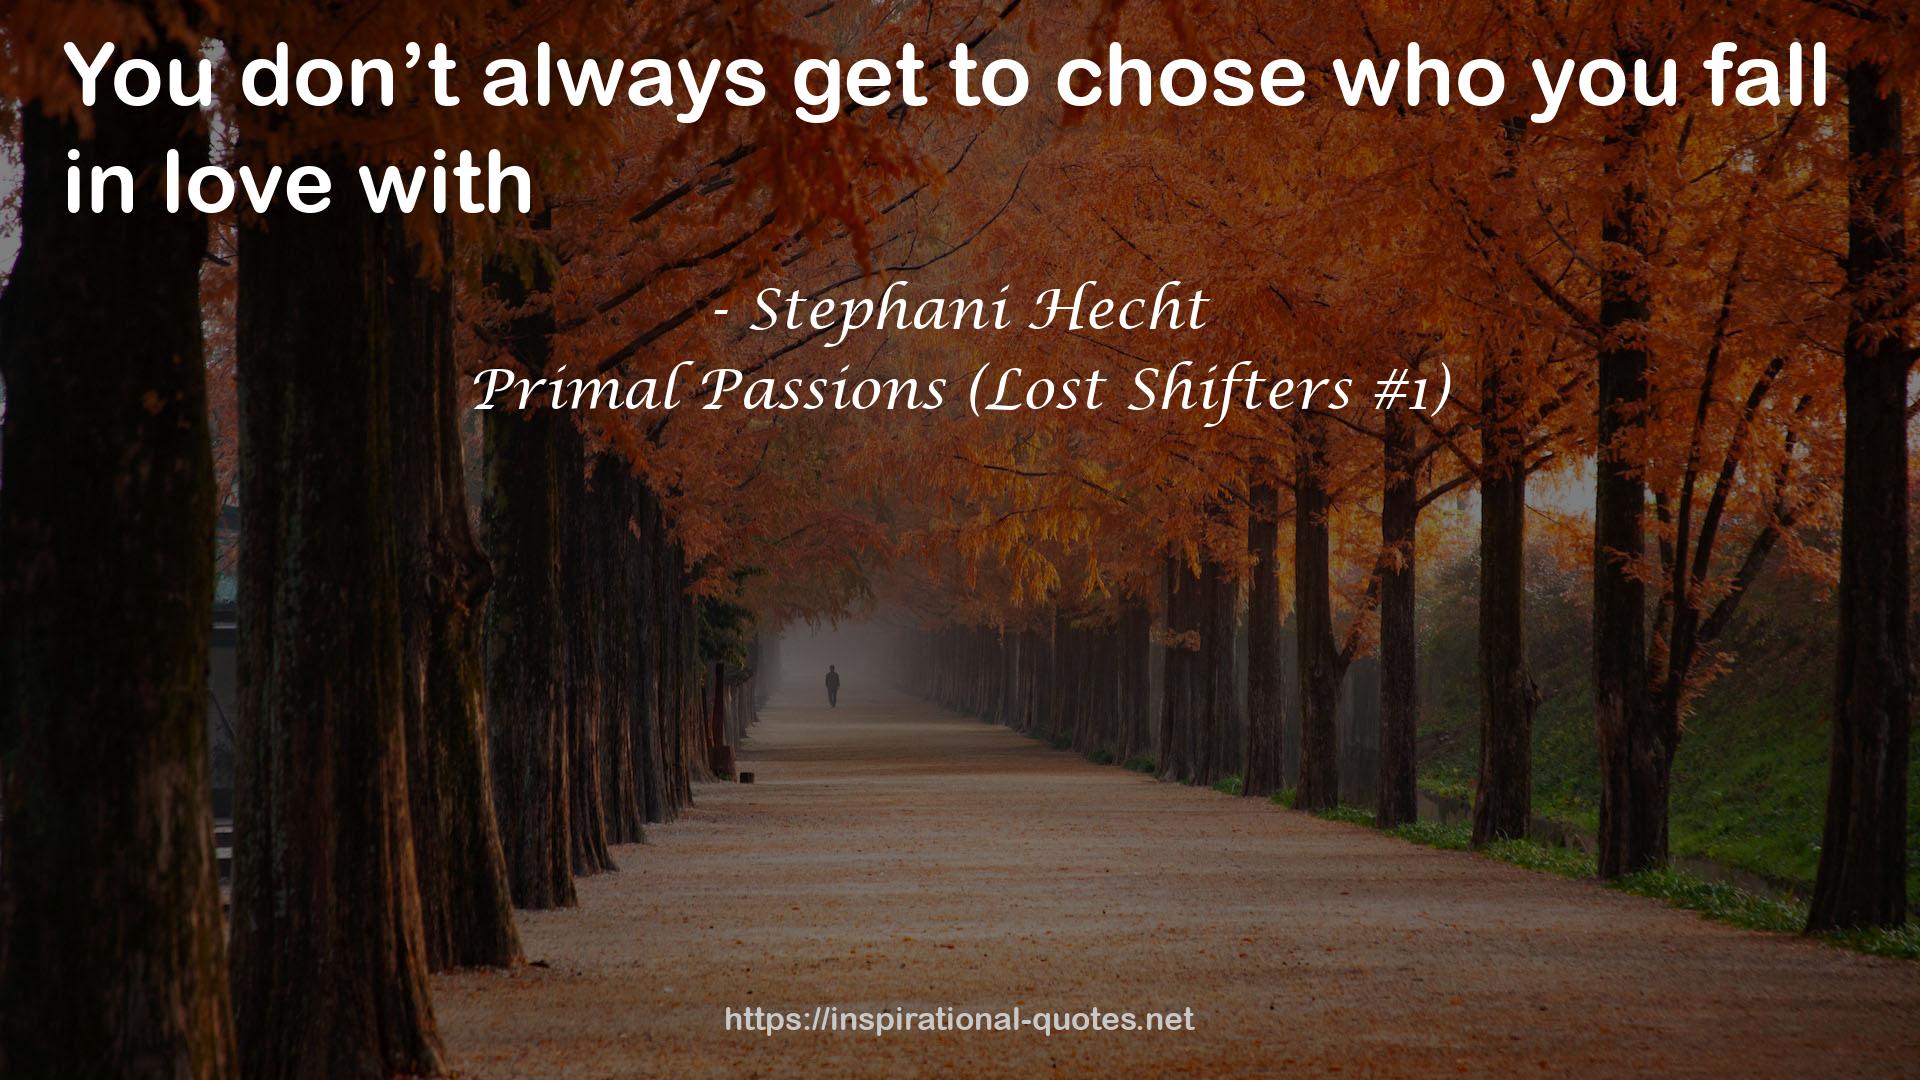 Primal Passions (Lost Shifters #1) QUOTES